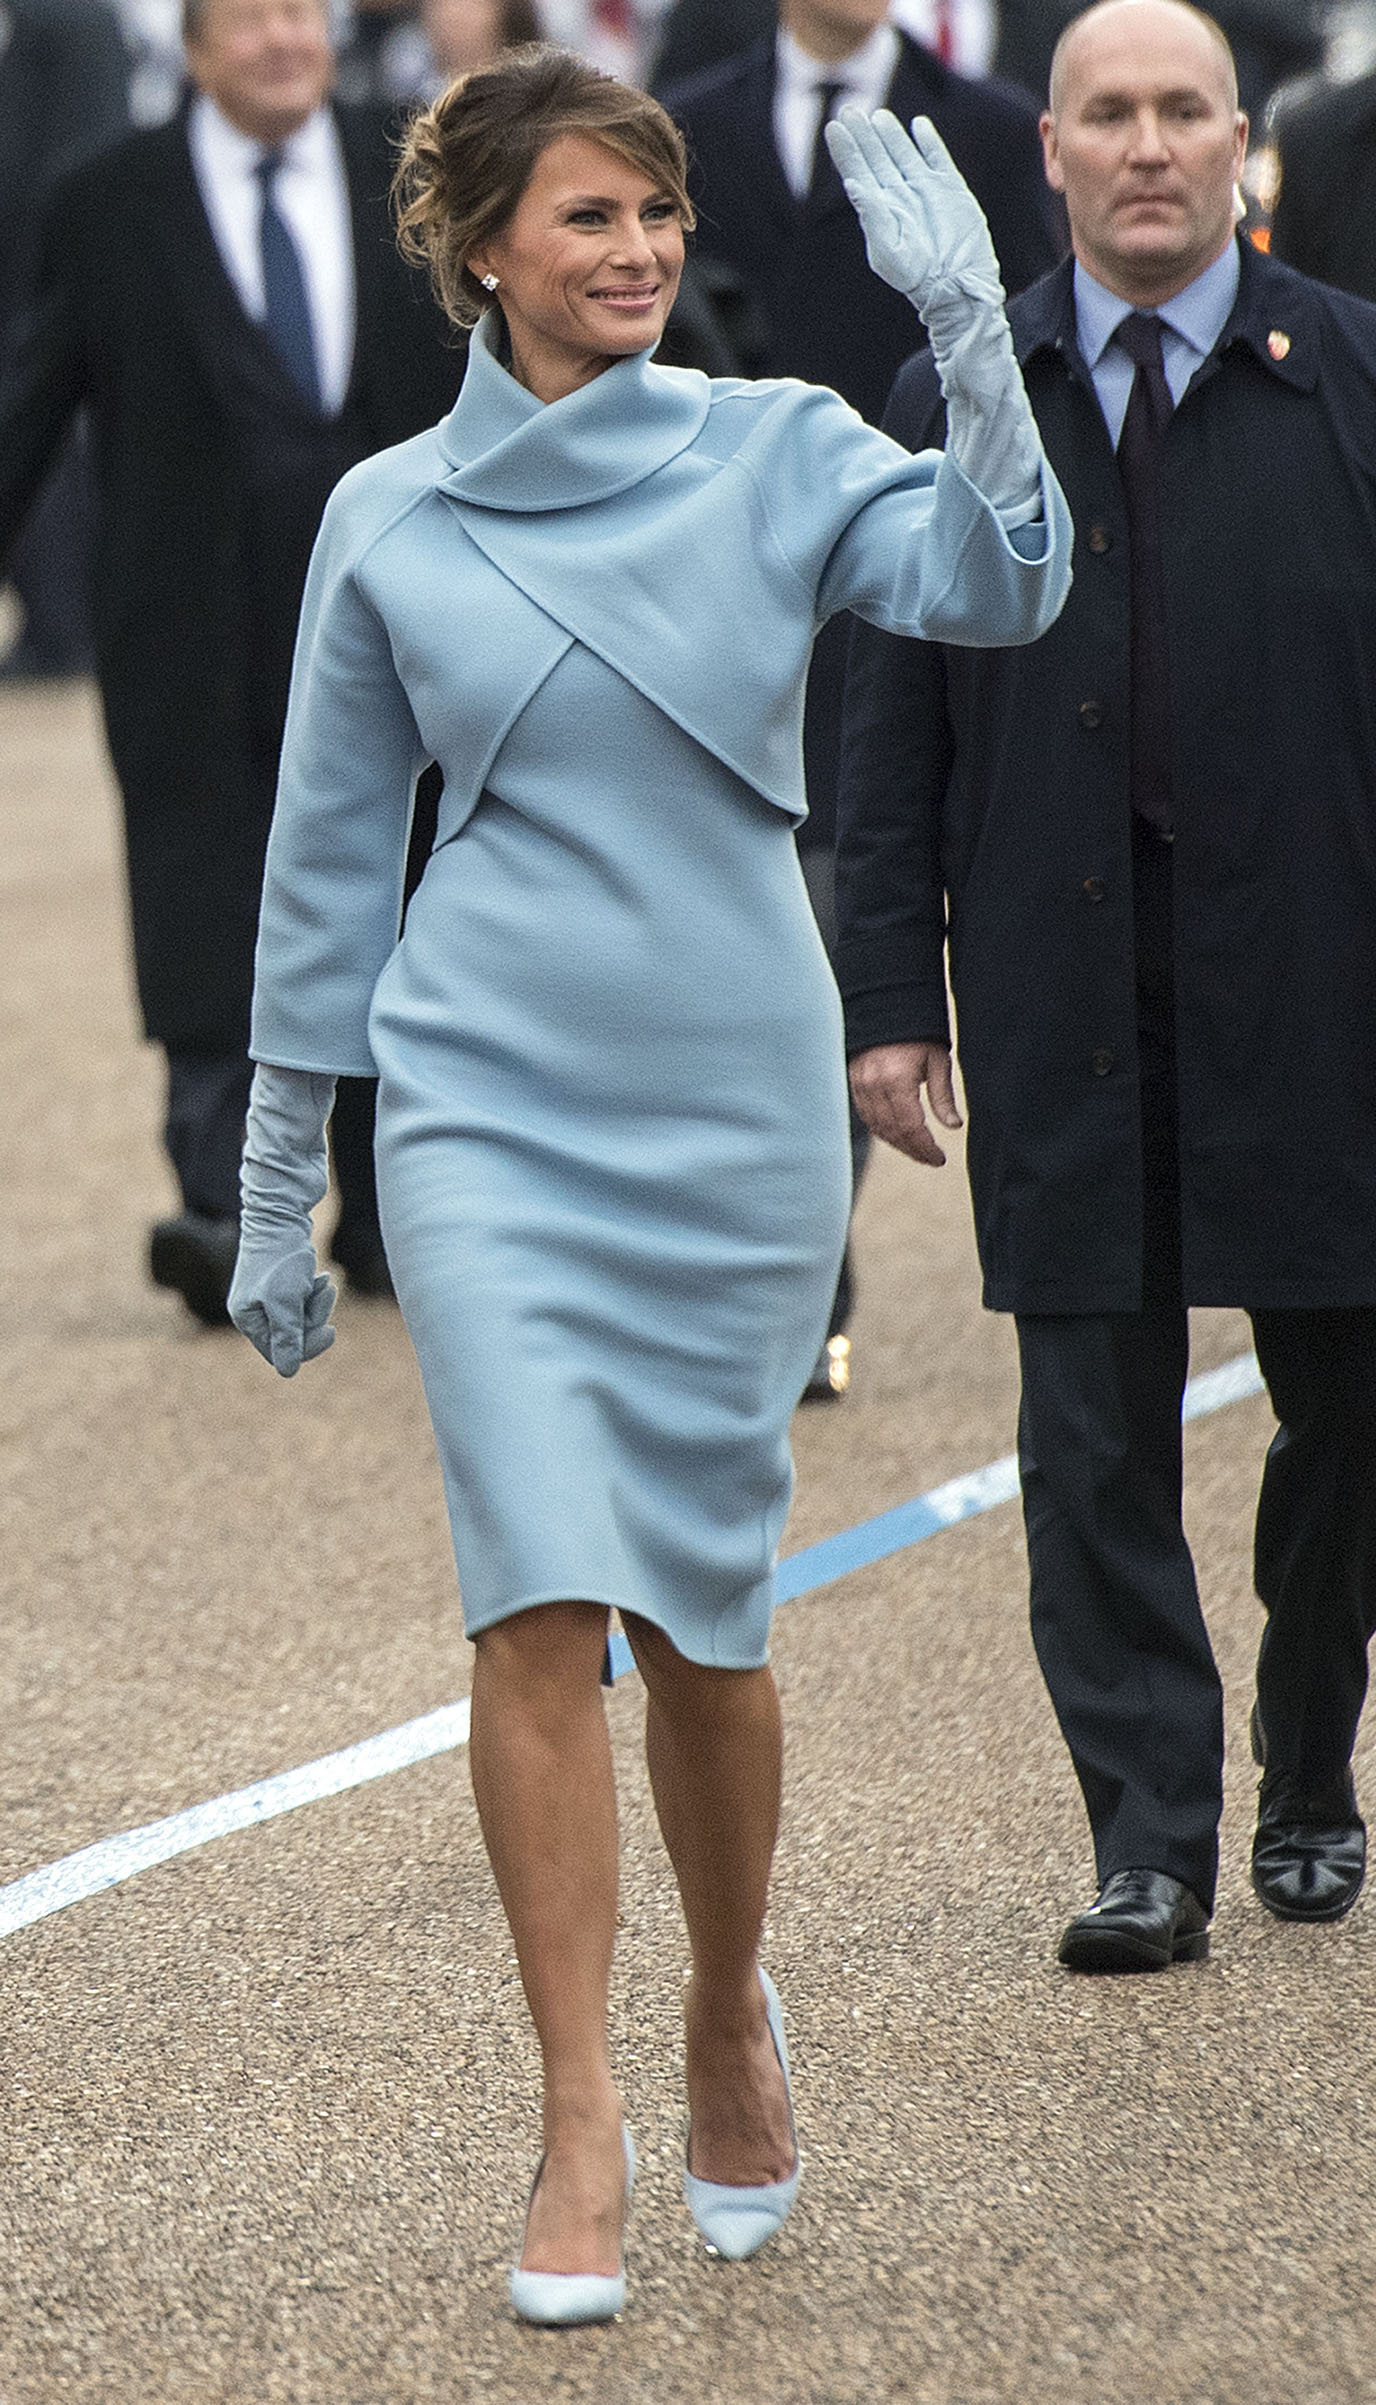 First lady Melania Trump wearing a powder blue cashmere skirt suit by the Ralph Lauren Collection, waves to supporters in the inaugural parade on January 20, 2017 in Washington, DC.